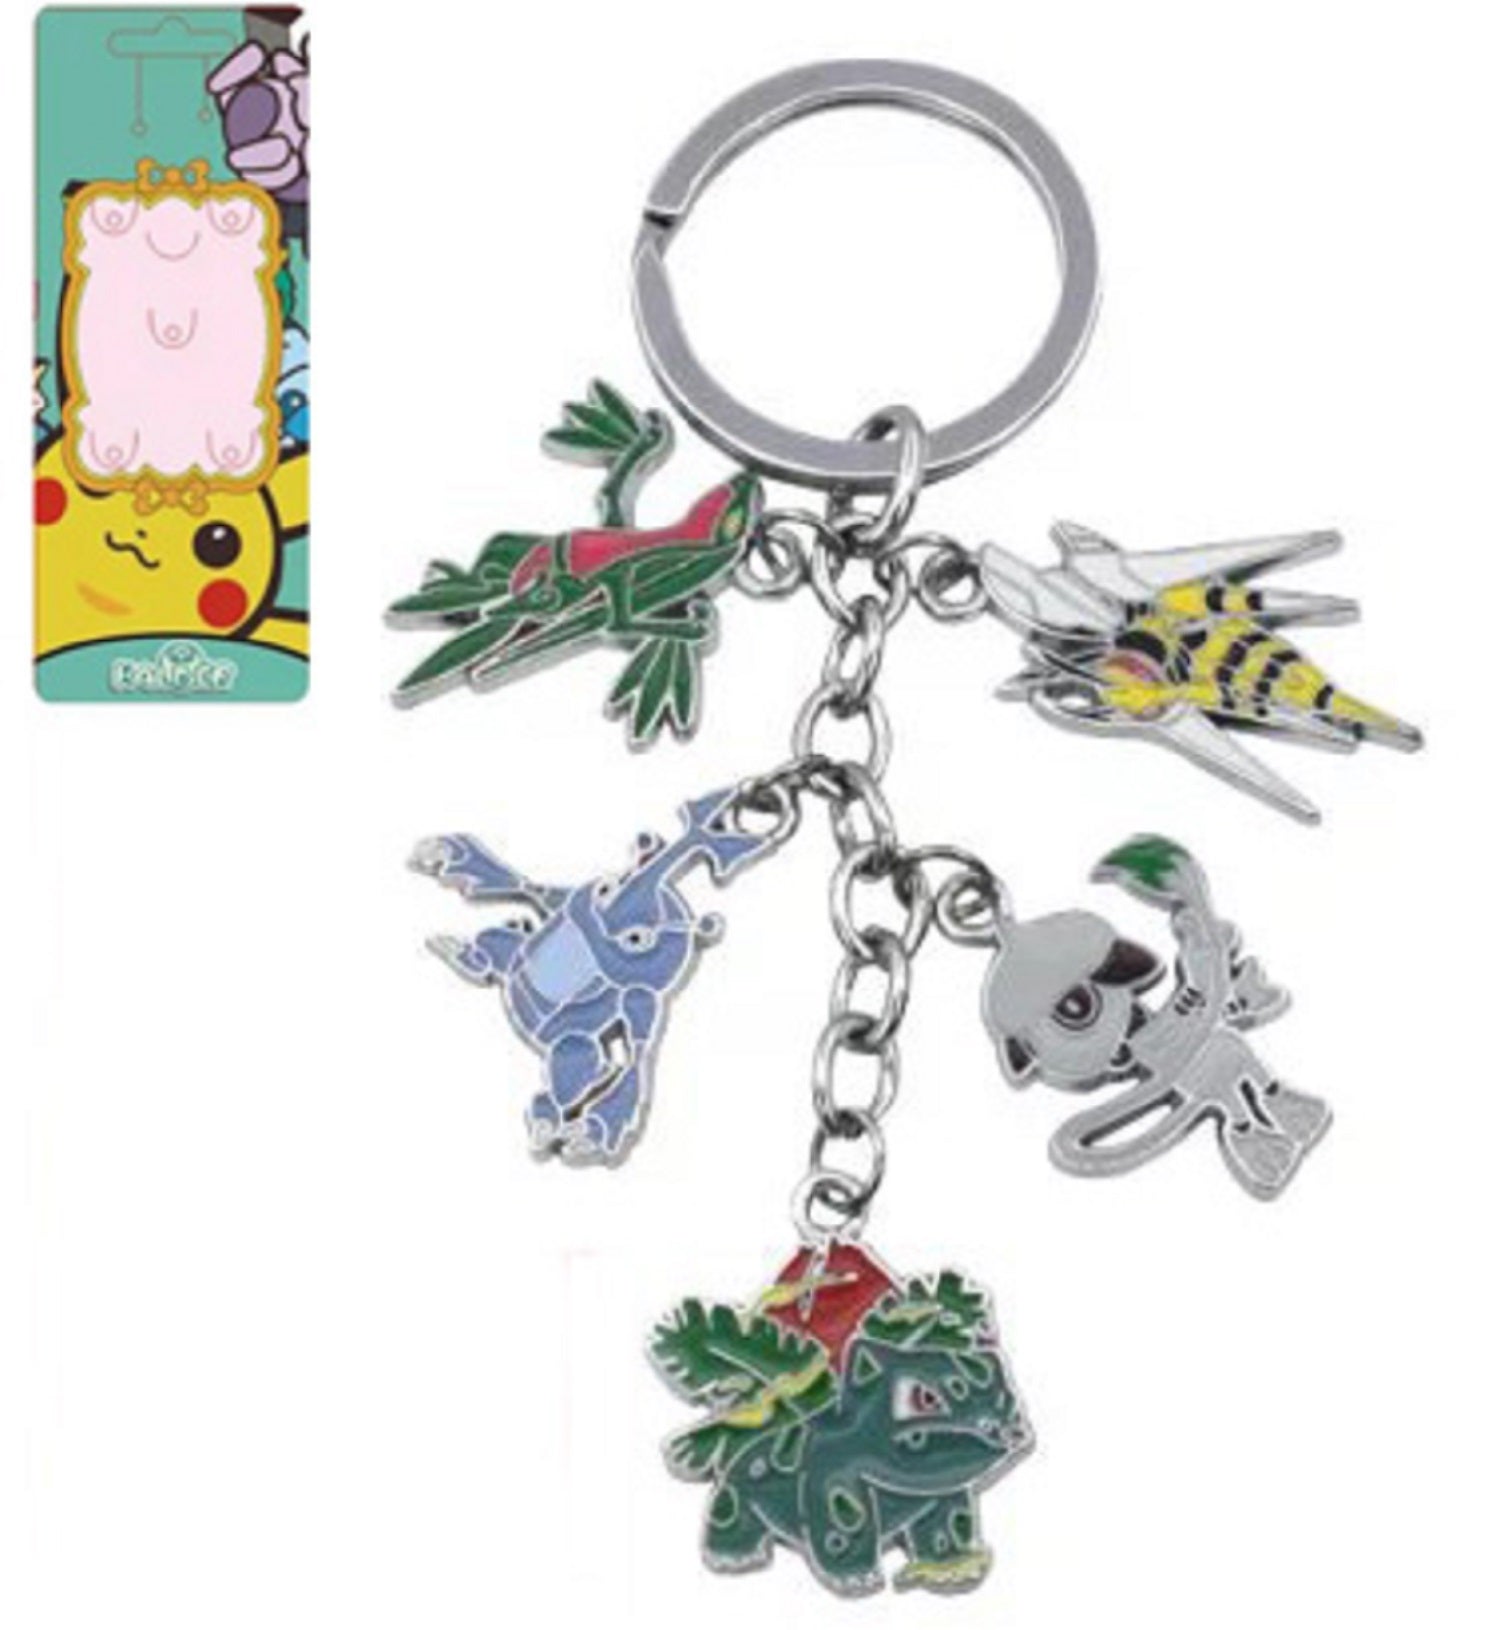 Heracross Grovyl & Others Keychain - Super Anime Store FREE SHIPPING FAST SHIPPING USA